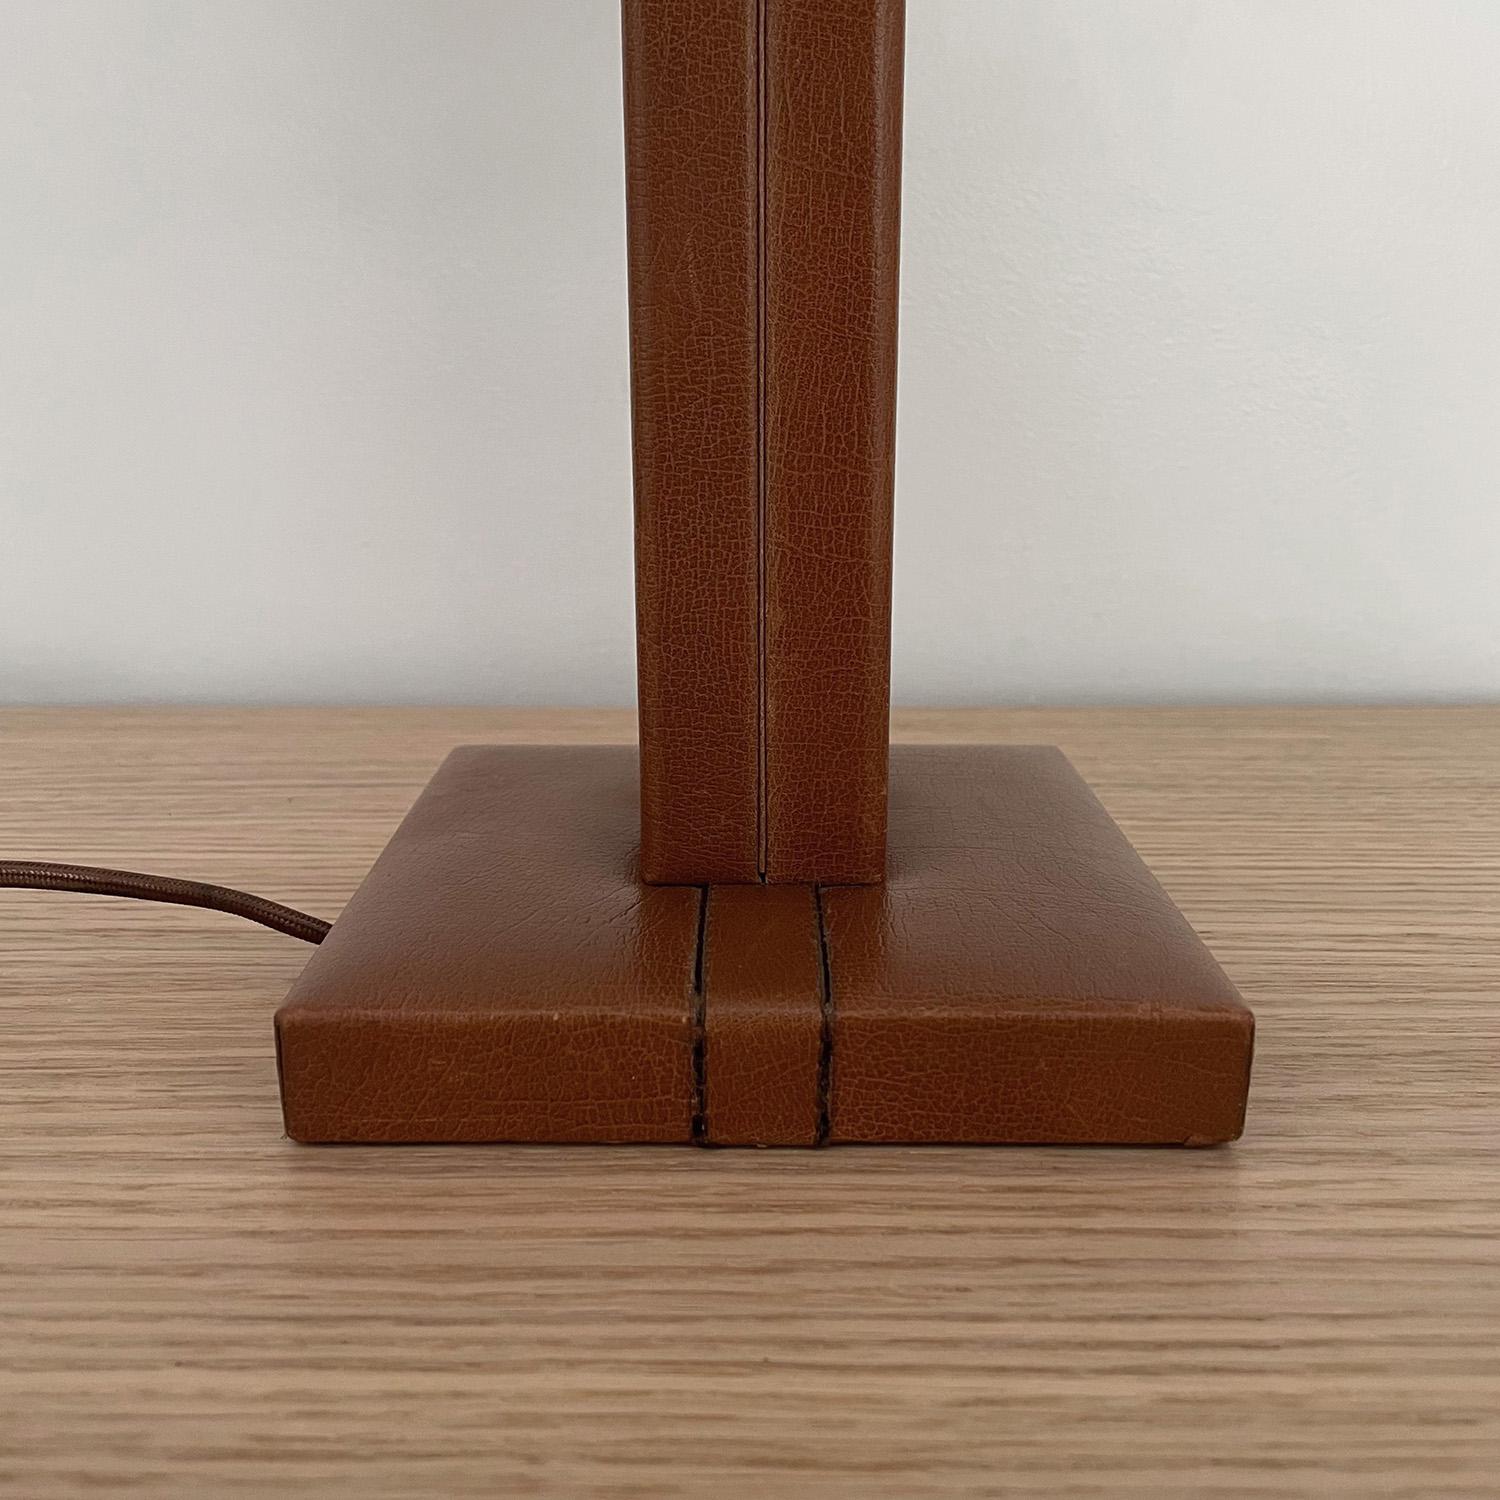 French Leather Table Lamp in style of Jacques Adnet For Sale 1